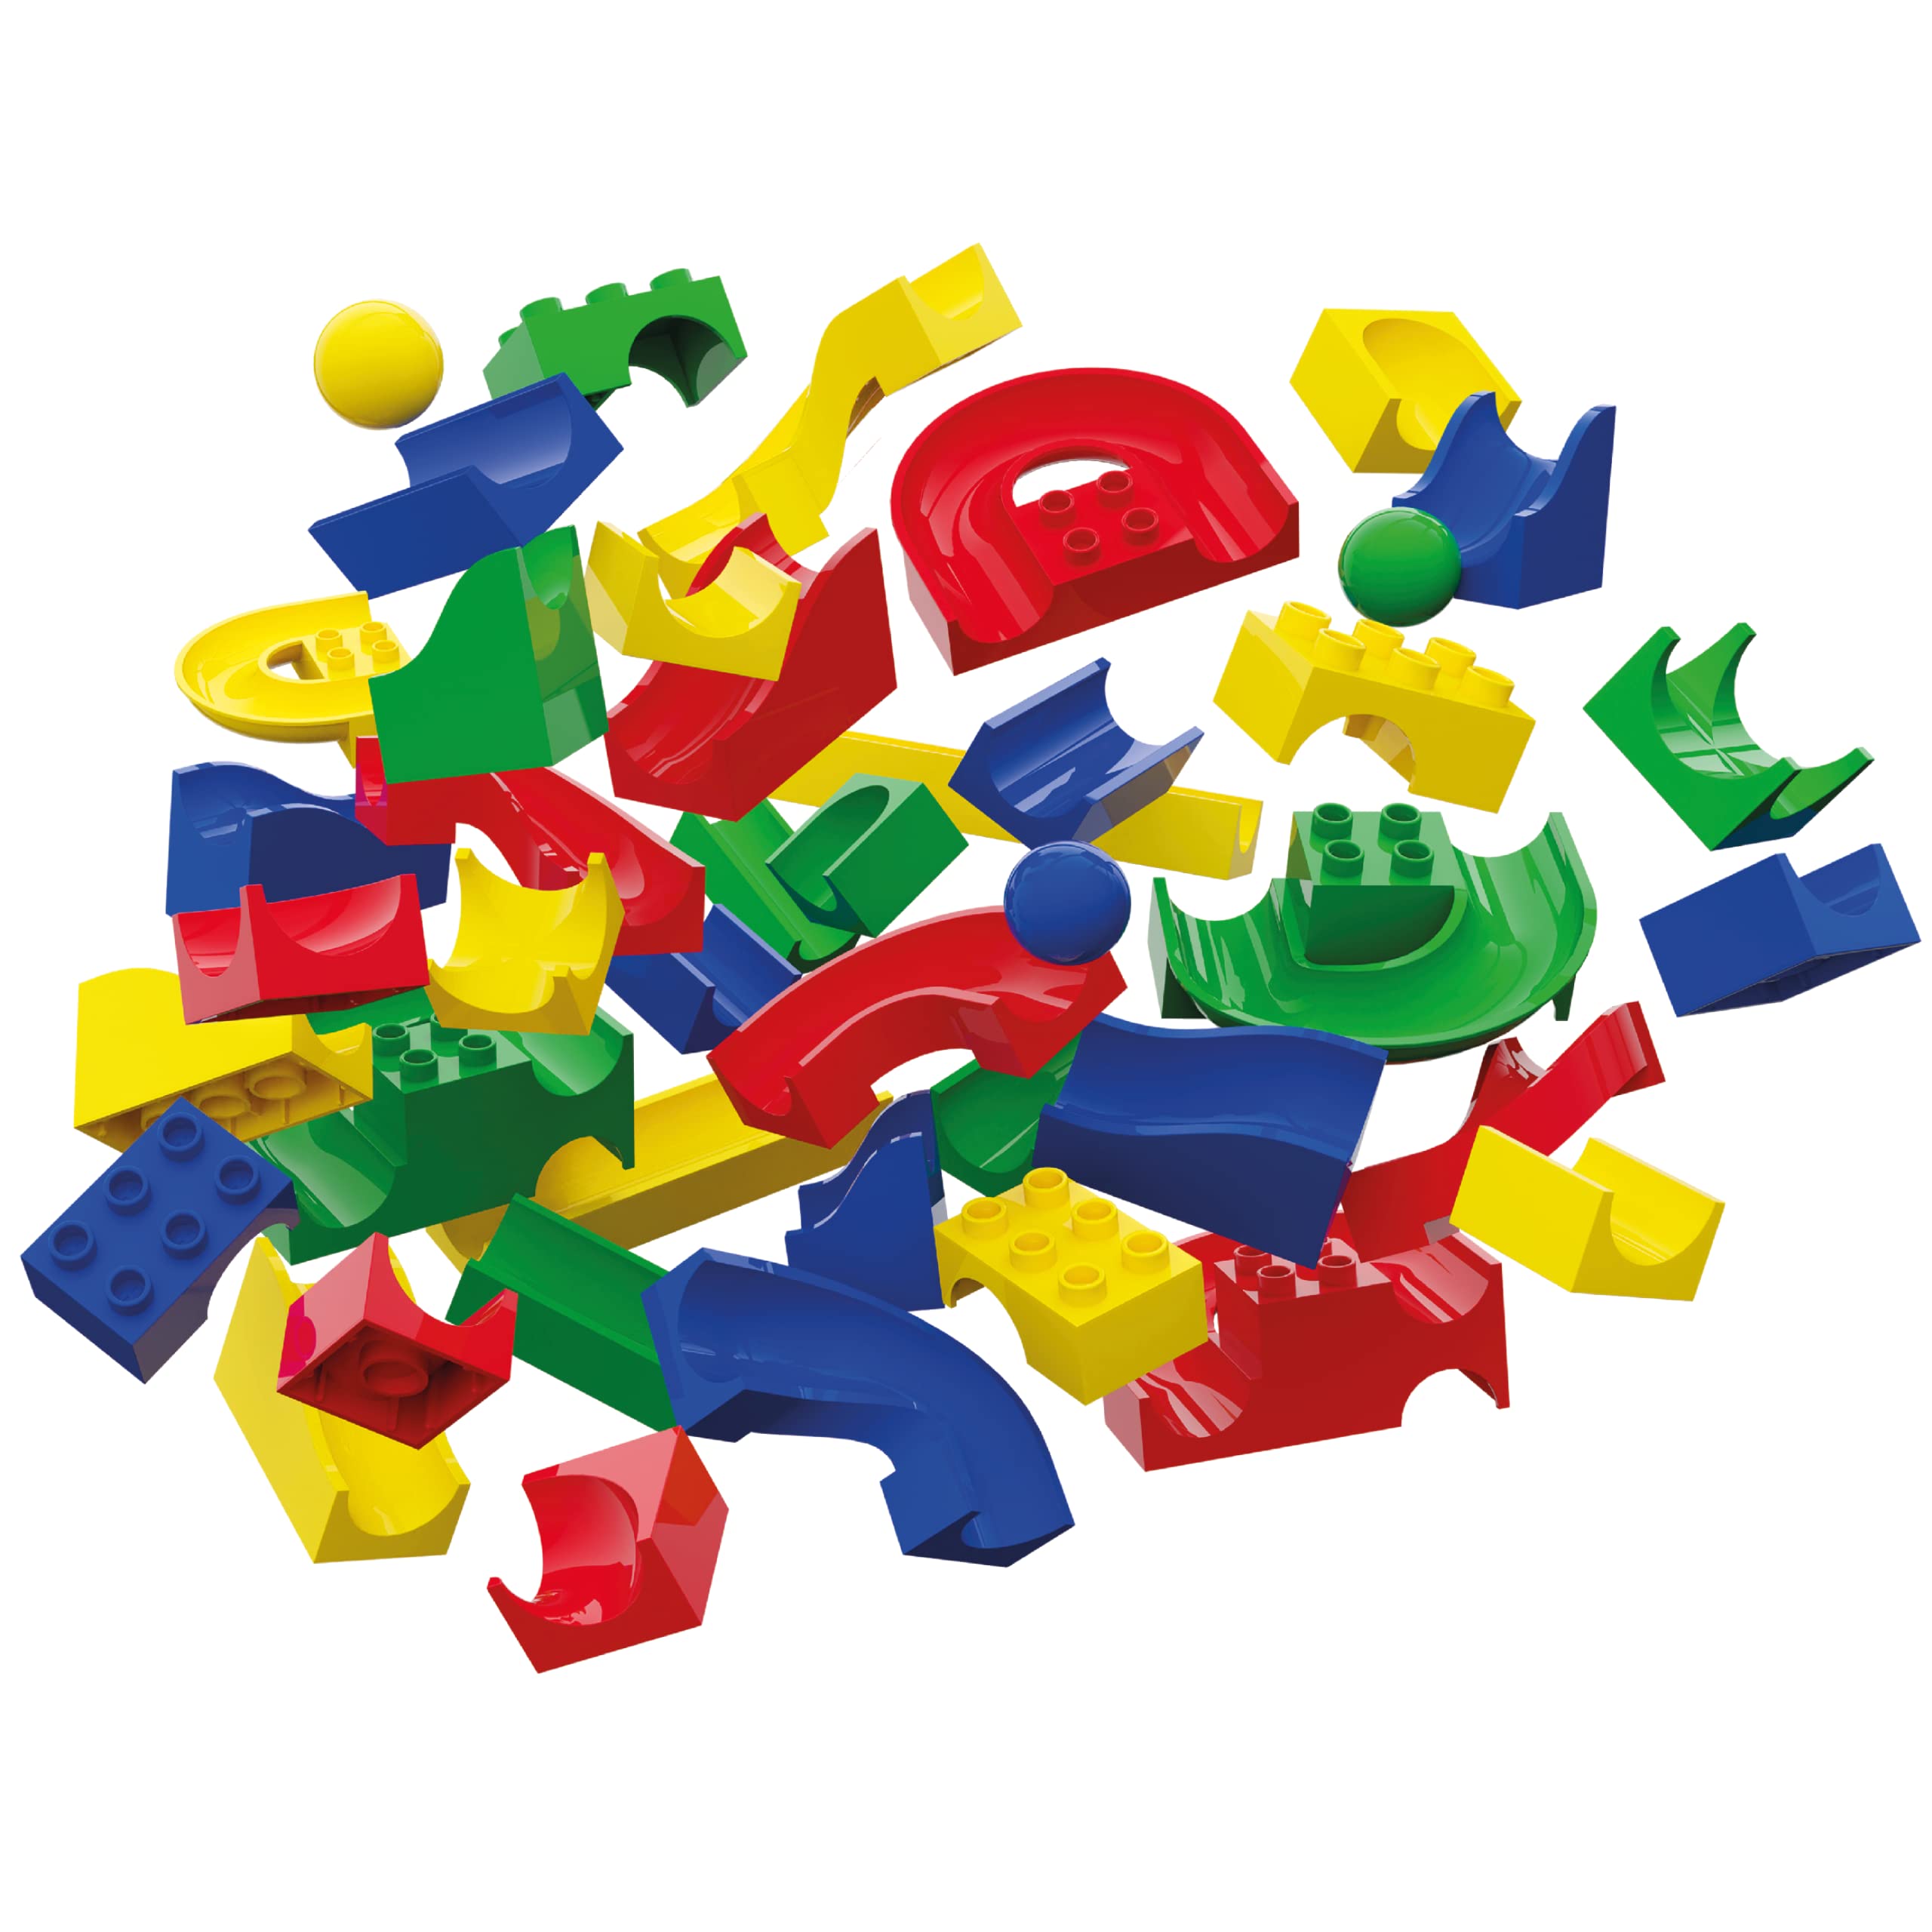 Hubelino 128 Piece Run Elements - The Original Marble Run Expansion Set - Made in Germany